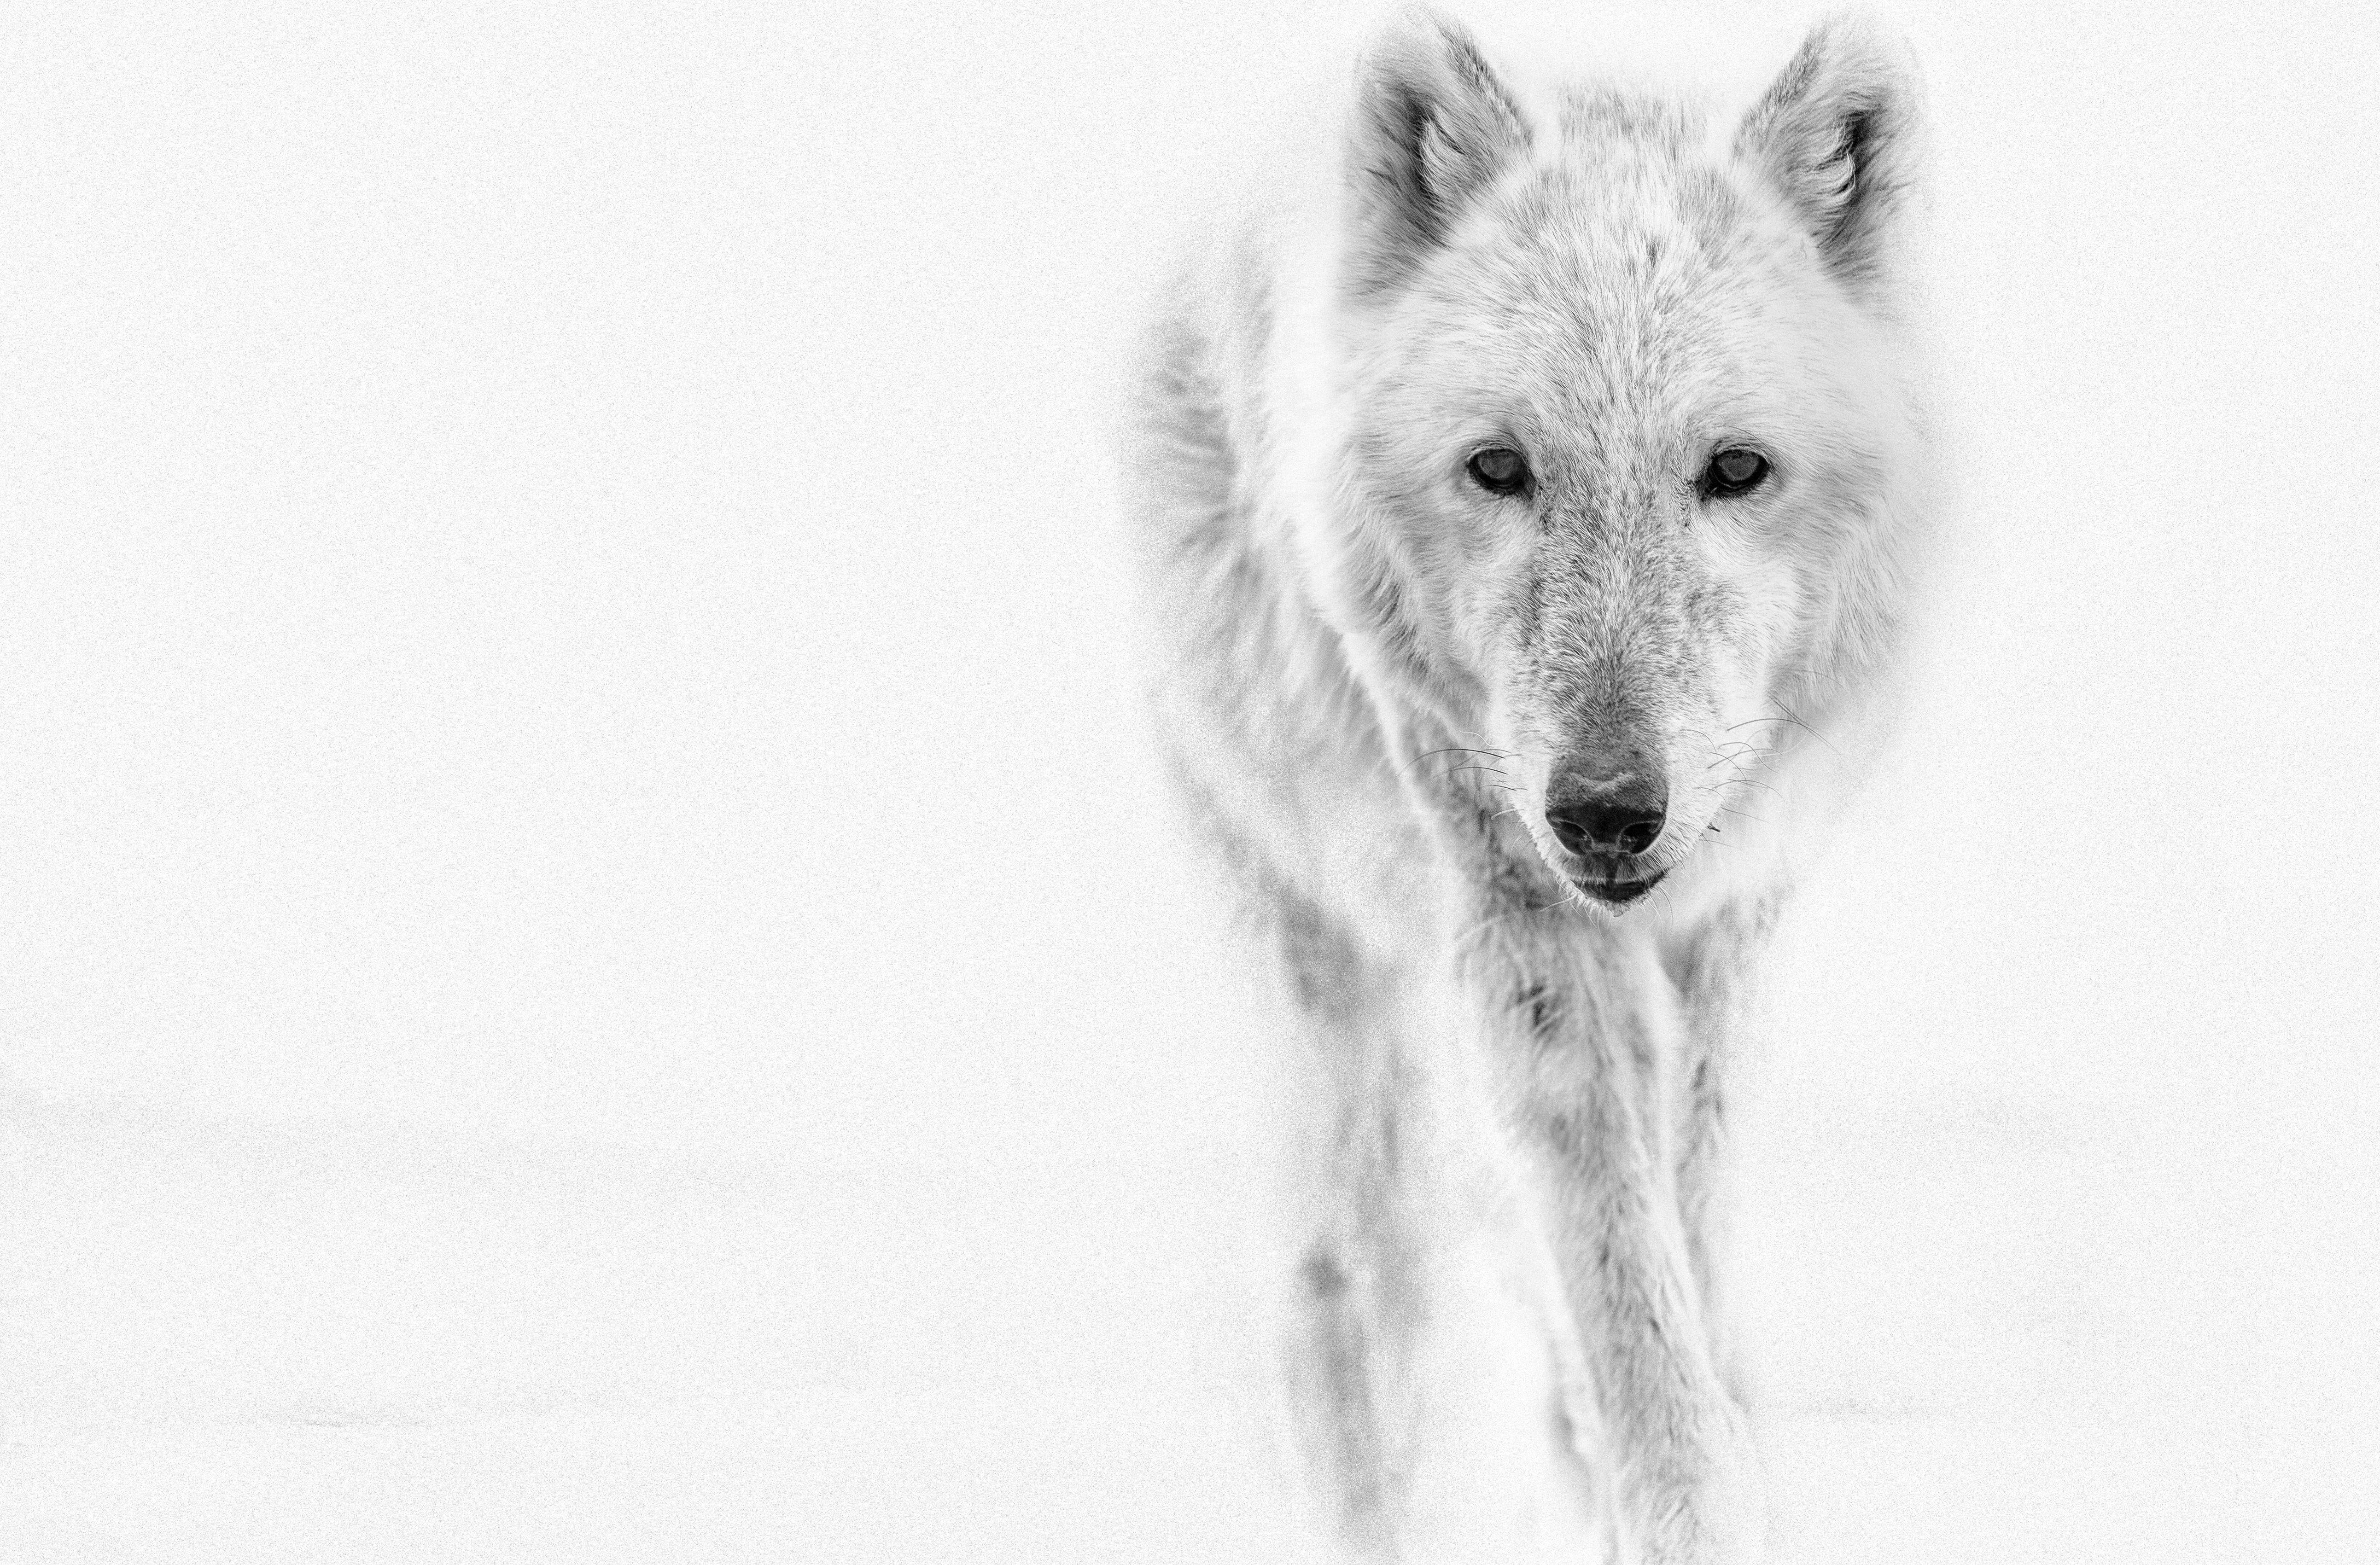 Shane Russeck Animal Print - Photograph of "Arctic Wolf" 36x48  Black and White Photography, Wolves Art Print